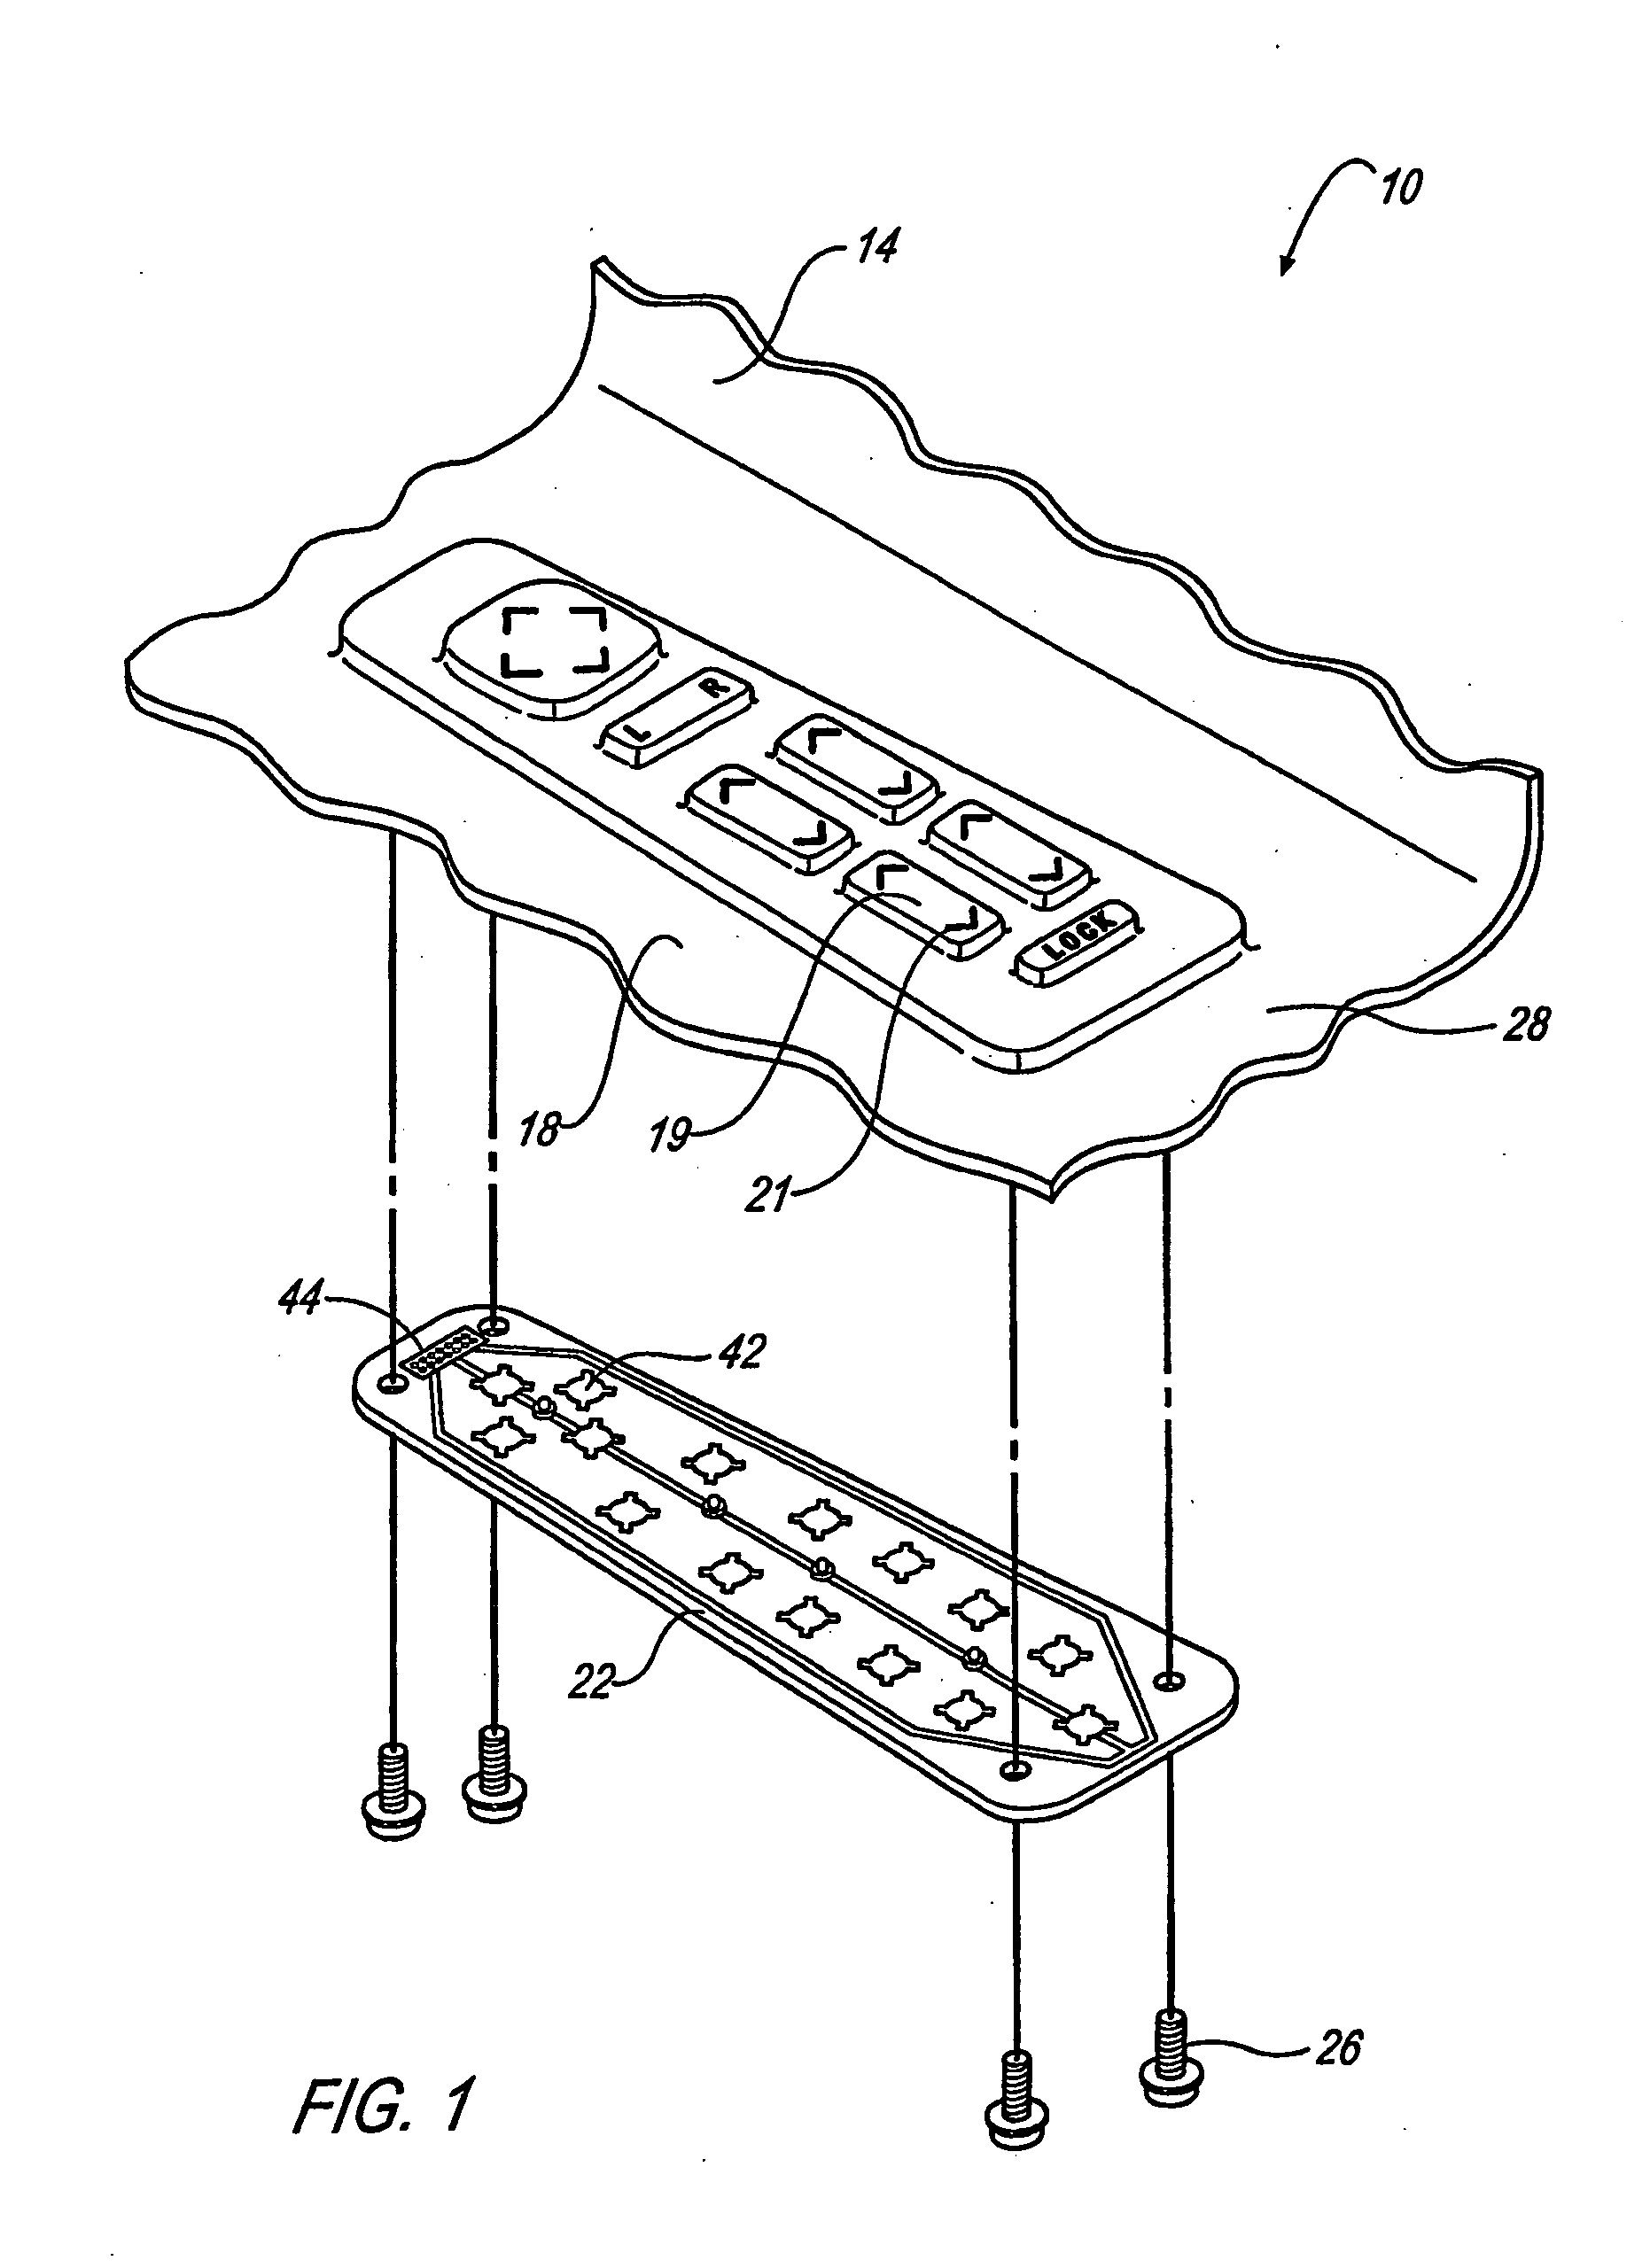 Multi-shot injection molded component and method of manufacture